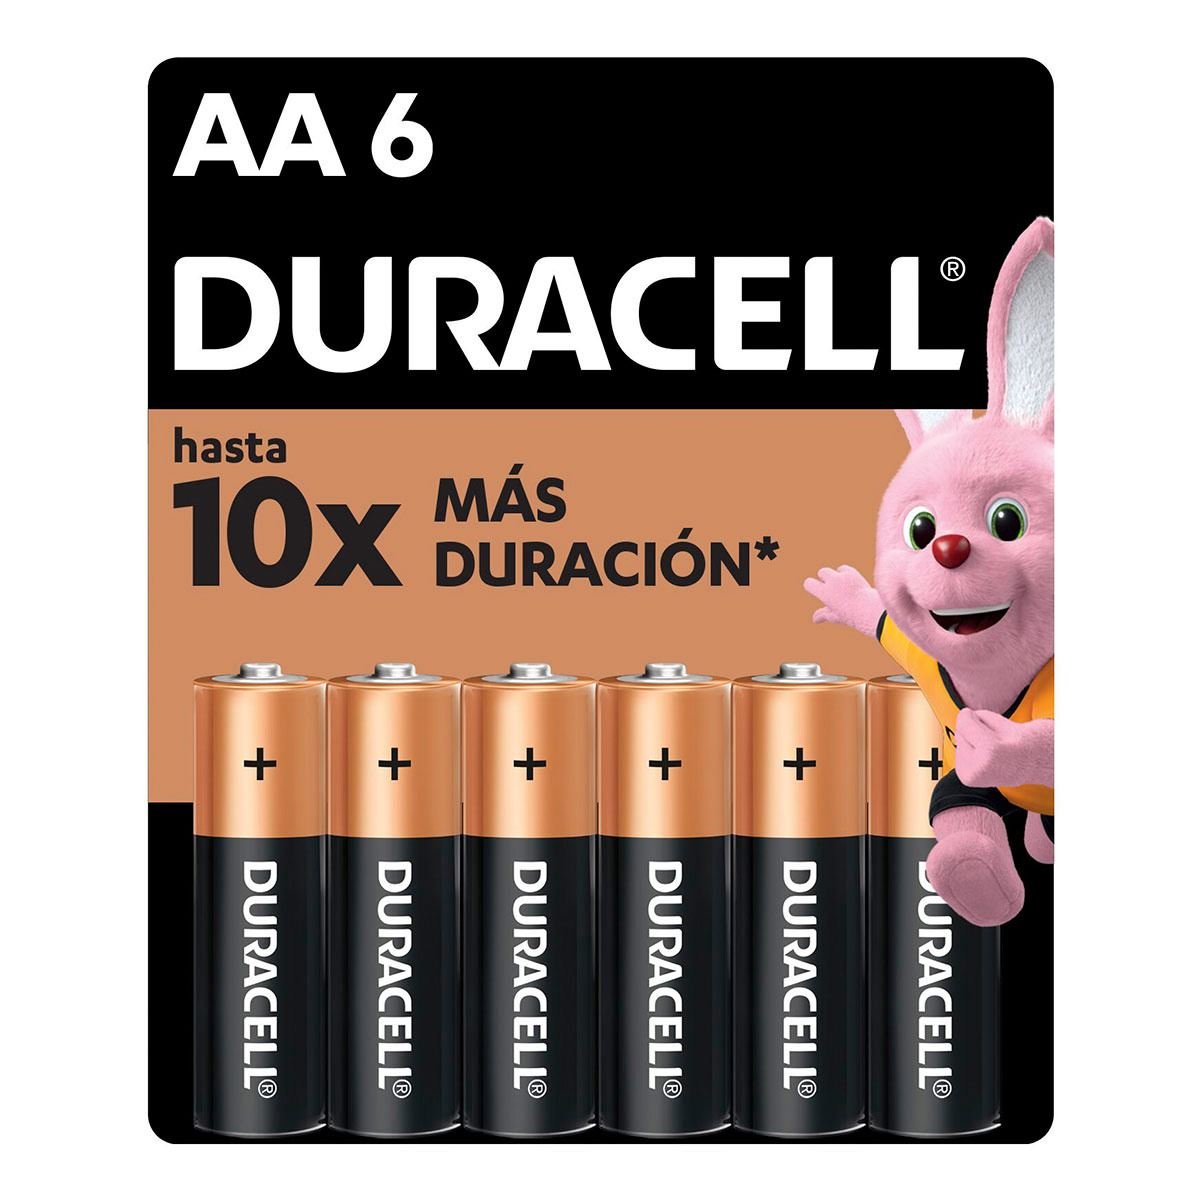 DURACELL Pack Pilas Alcalinas 4 AA y 4 AAA Duracell